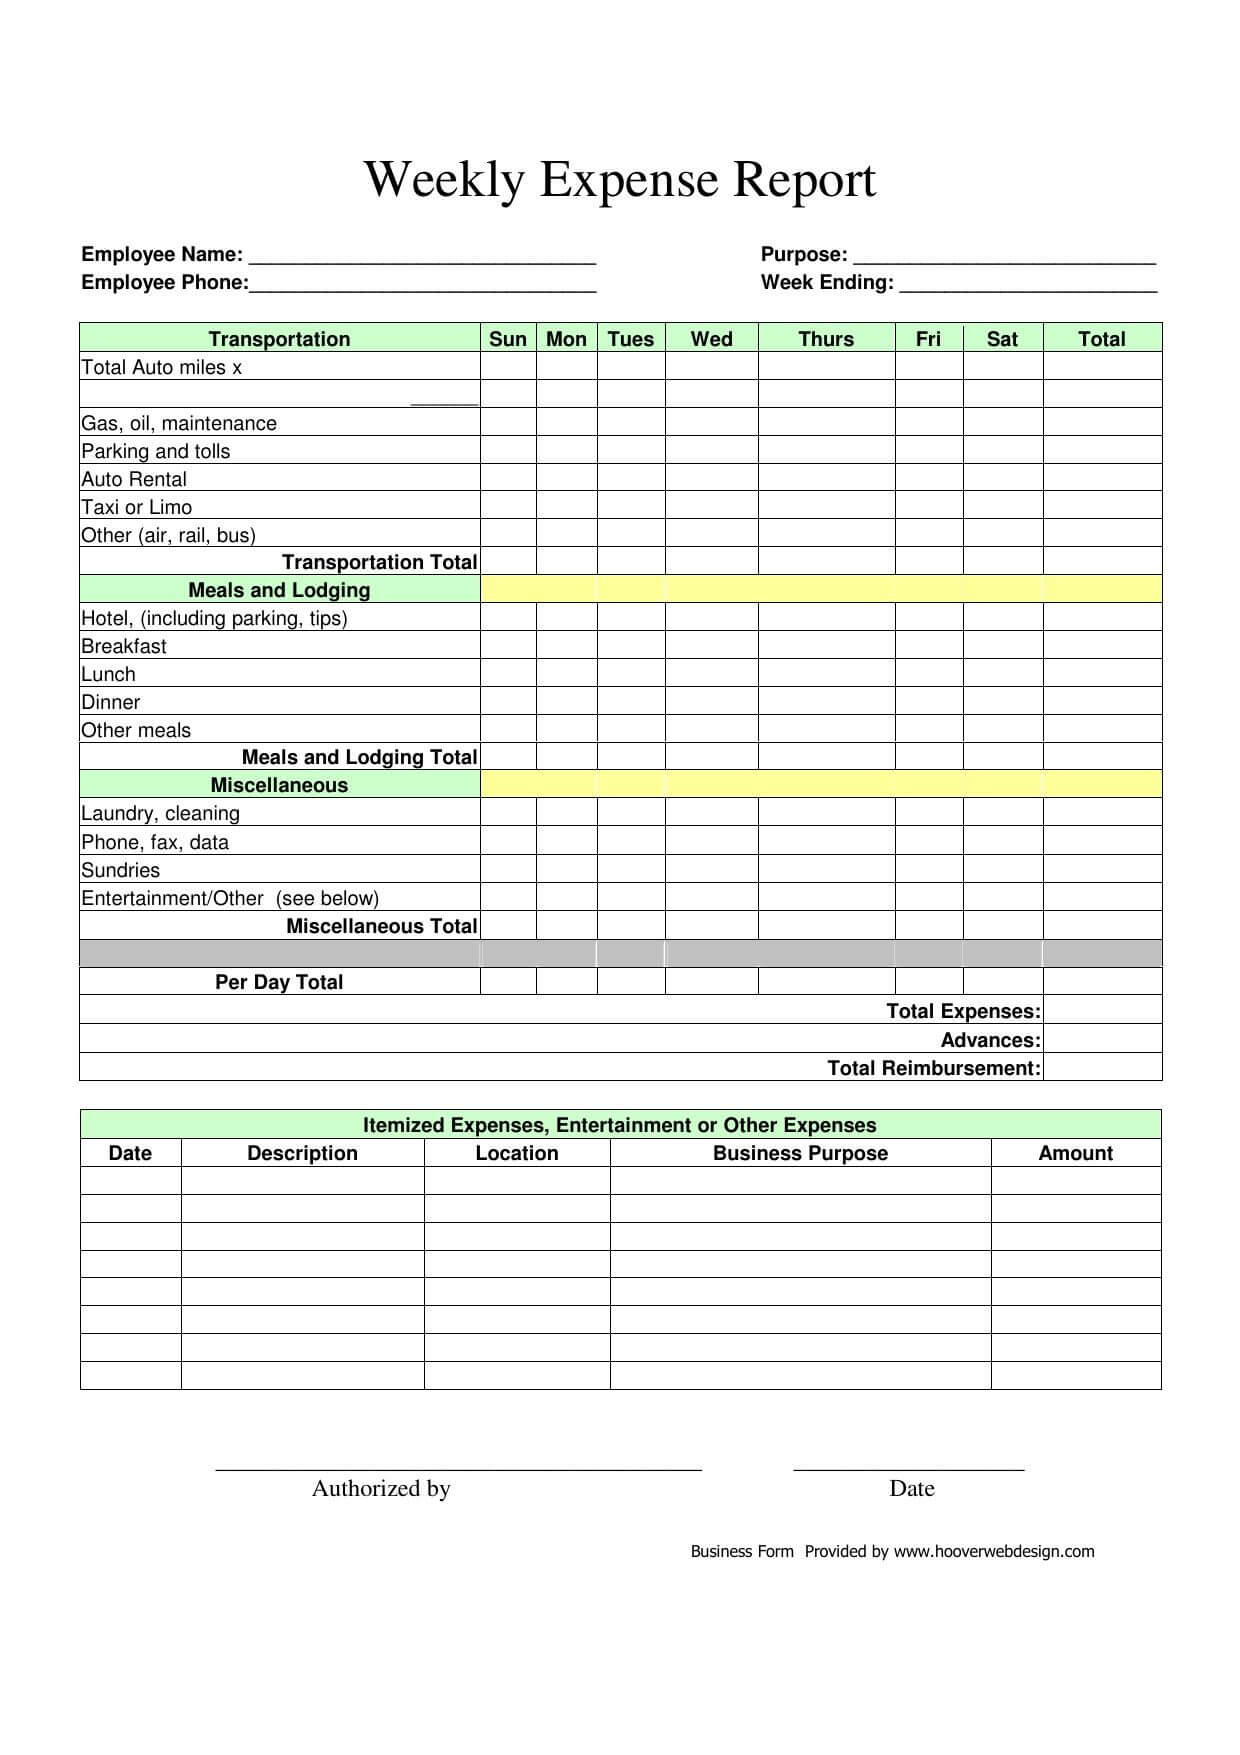 New Expenses Report Template Excel #xlstemplate #xlssample In Expense Report Template Xls